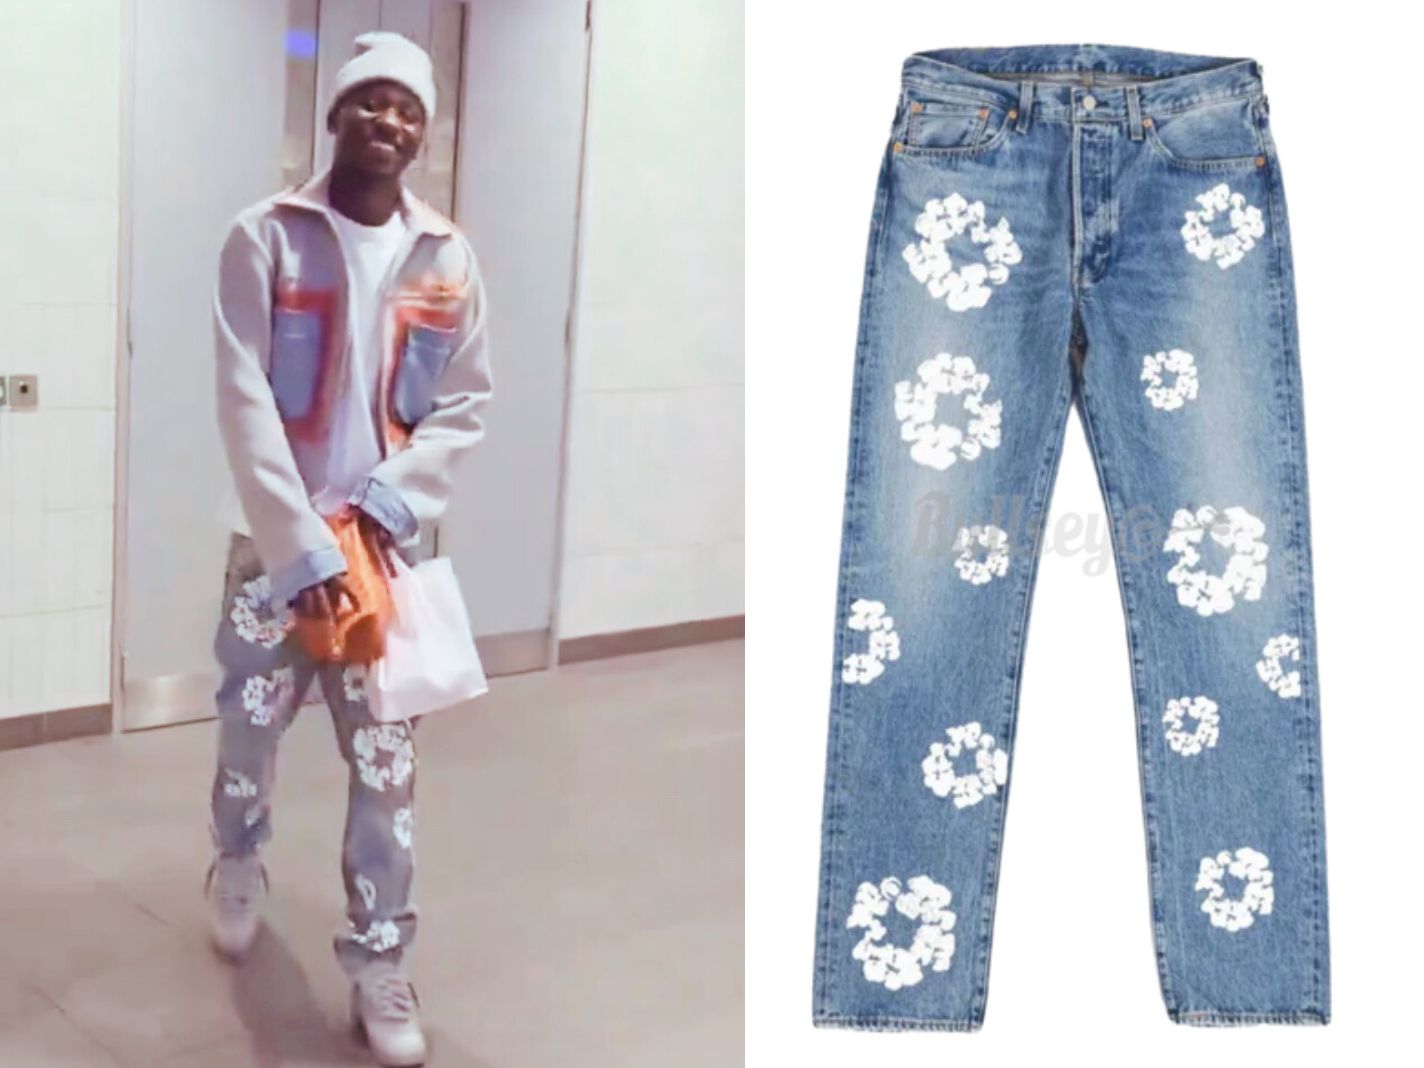 Pape Matar Sarr Sheds Light on Racist History with Denim Tears x Levi’s Jeans